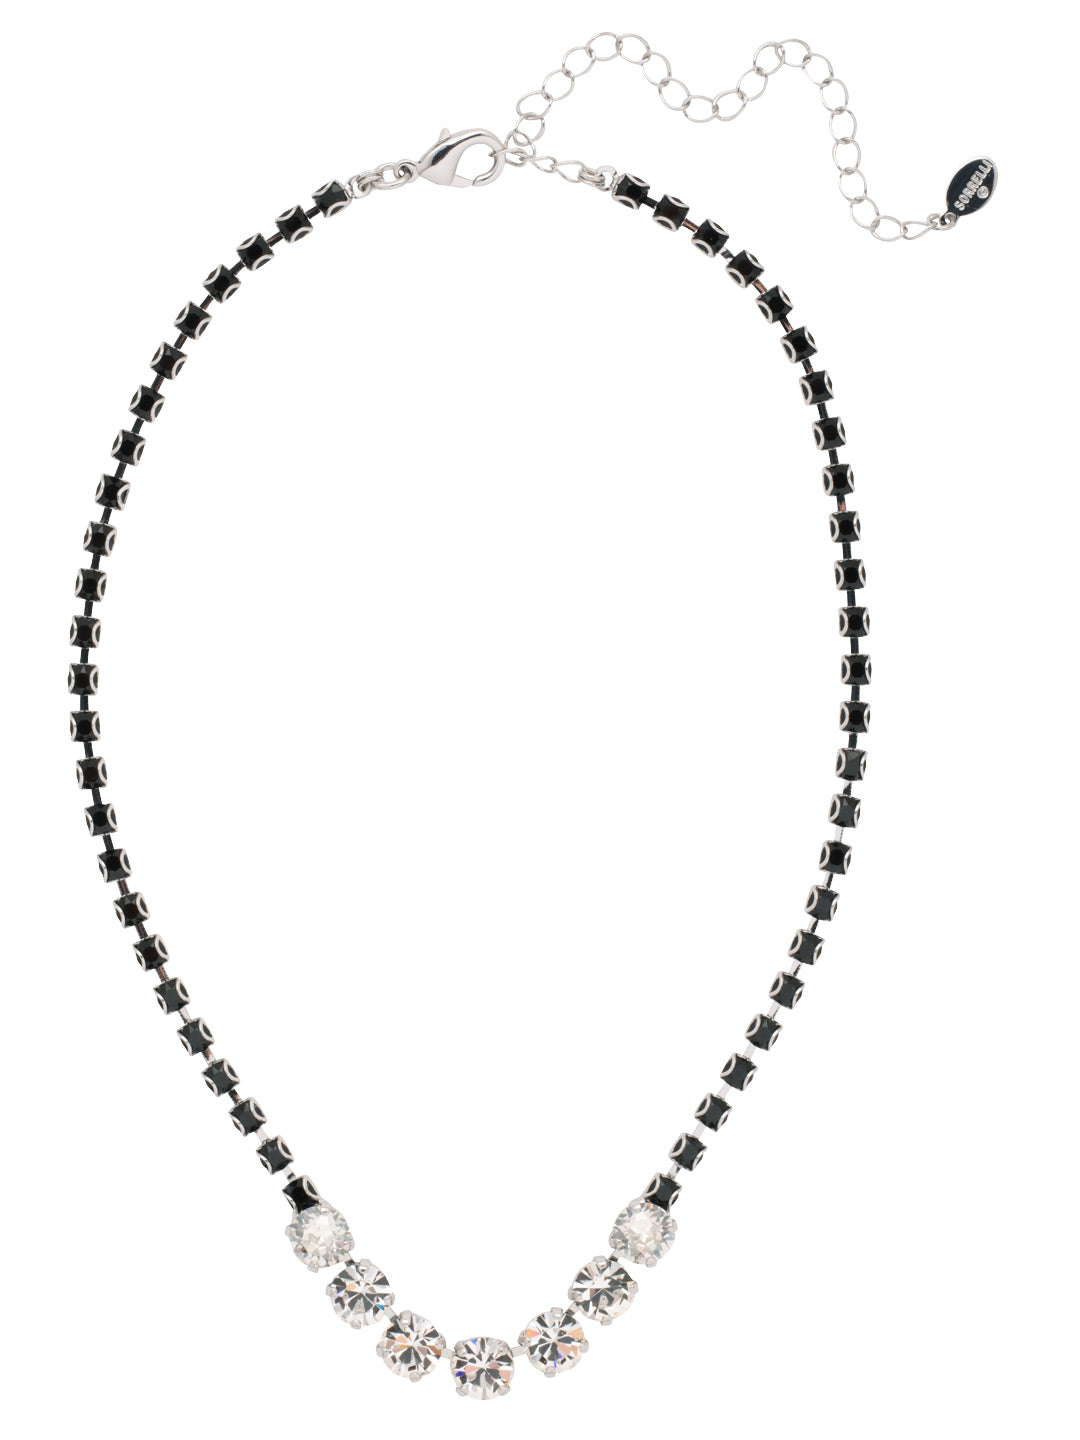 Coco Tennis Necklace - NEZ31PDSNI - <p>The Coco Tennis necklace shines all around; a crystal studded adjustable chain hosts a row of round crystals, secured in the back with a lobster claw clasp. From Sorrelli's Starry Night collection in our Palladium finish.</p>